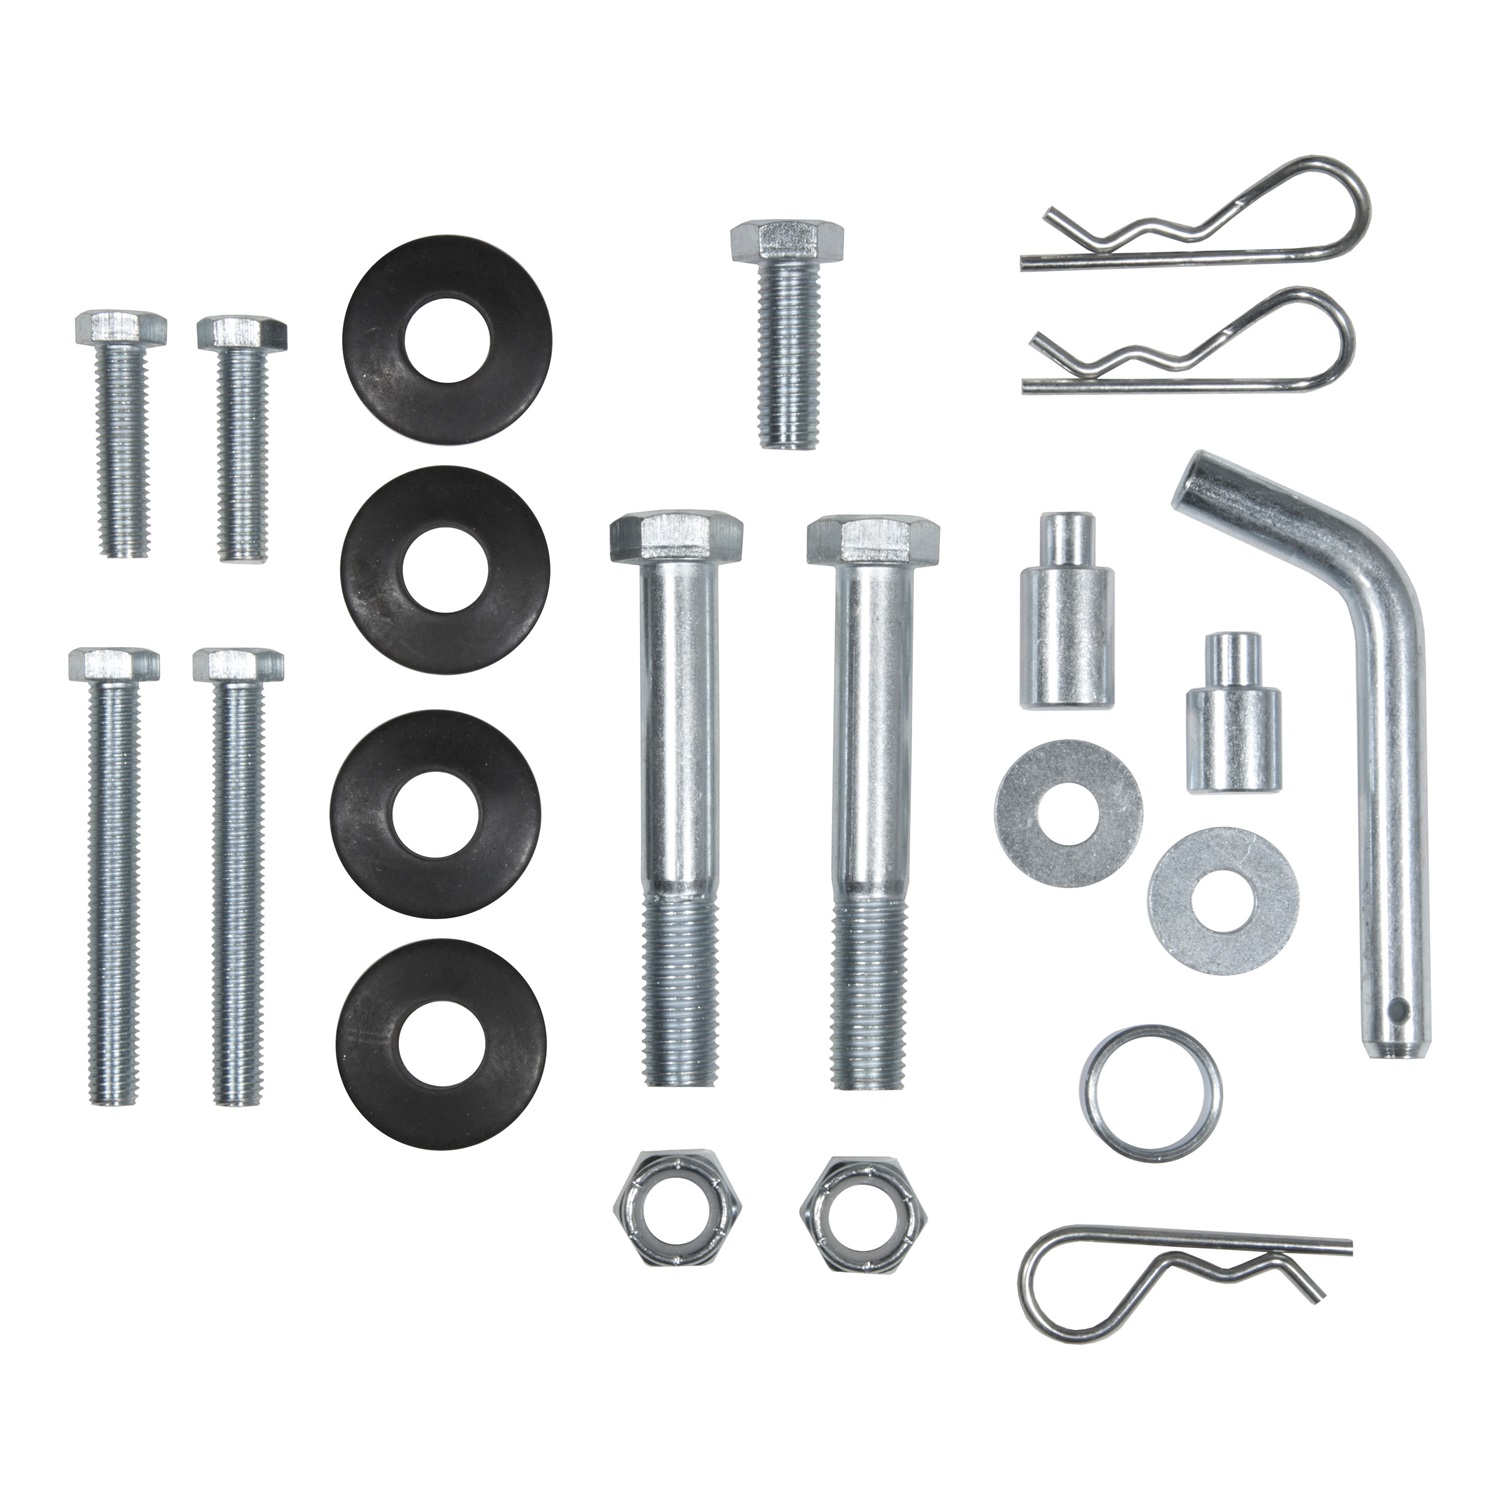 CURT Manufacturing CURT Manufacturing 17350 Weight Distribution Bolt Kit  Fits